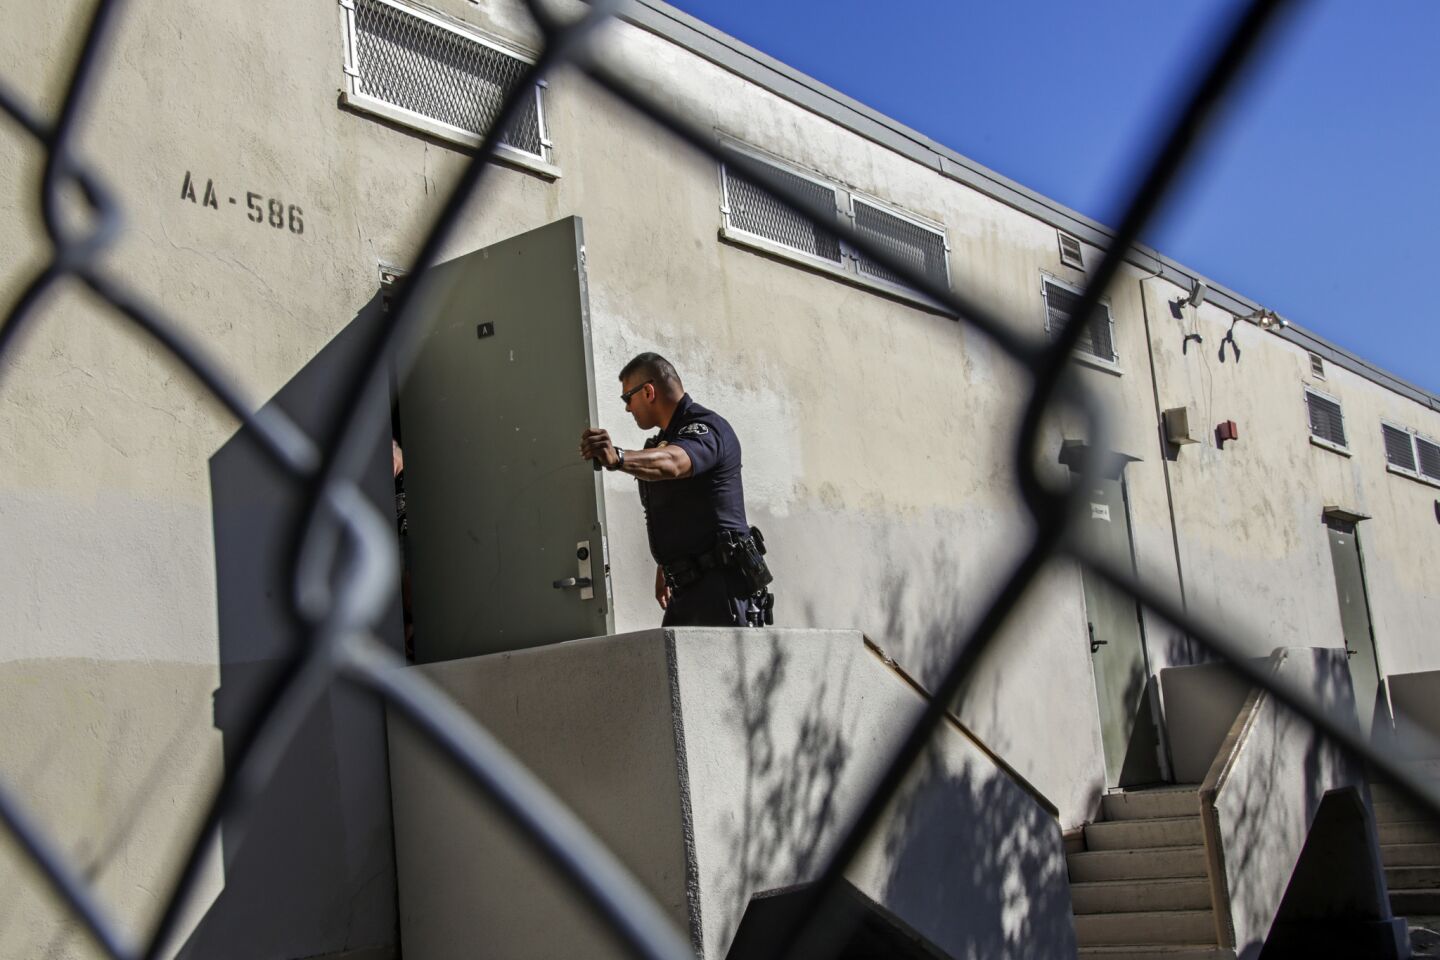 L.A. Unifed Police Officer Jose Zamora looks inside a classroom while conducting a safety check at Theodore Roosevelt High School in Los Angeles.